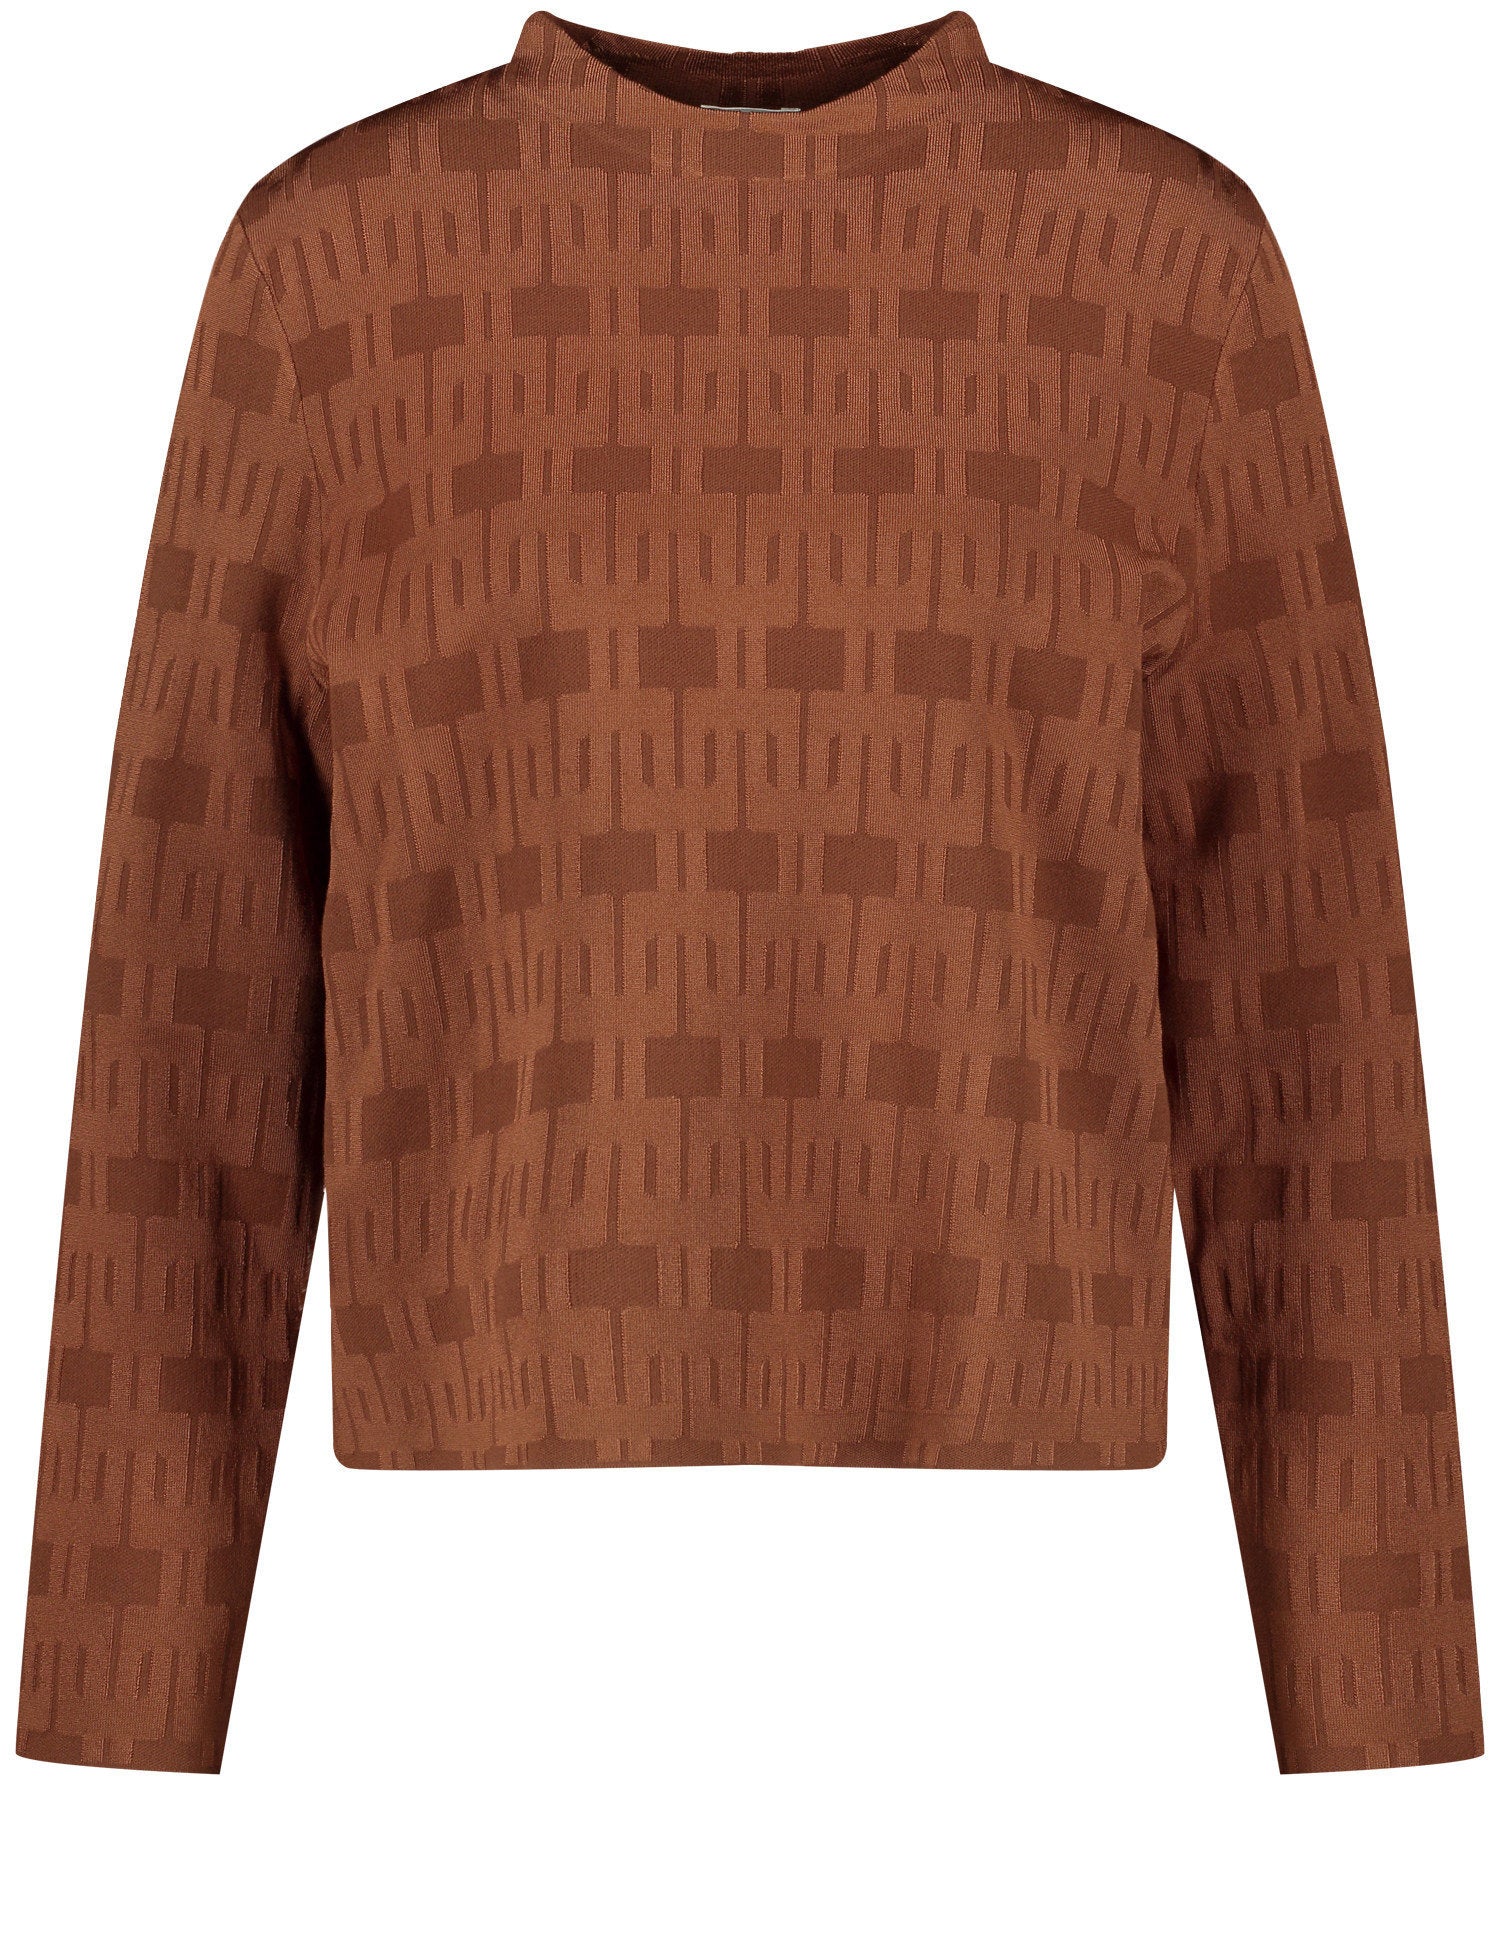 Jumper With A Short Stand Up Collar And A Jacquard Pattern_271022-35719_60703_02